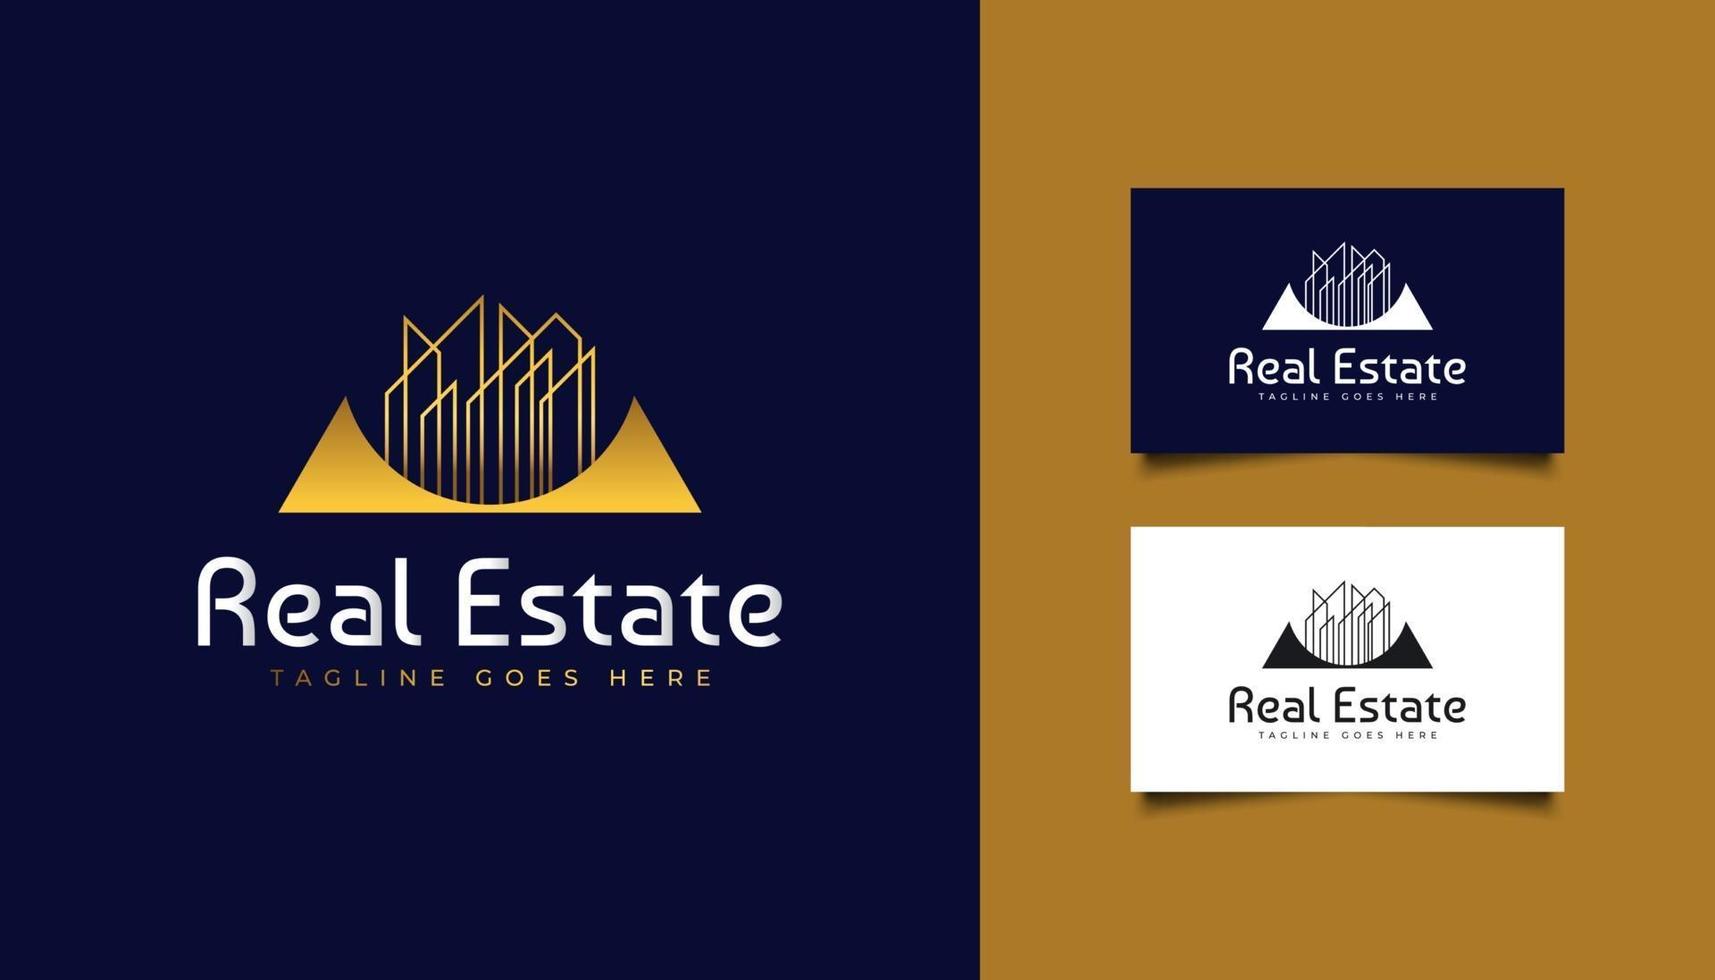 Real Estate Logo in Gold Gradient with Line Style vector